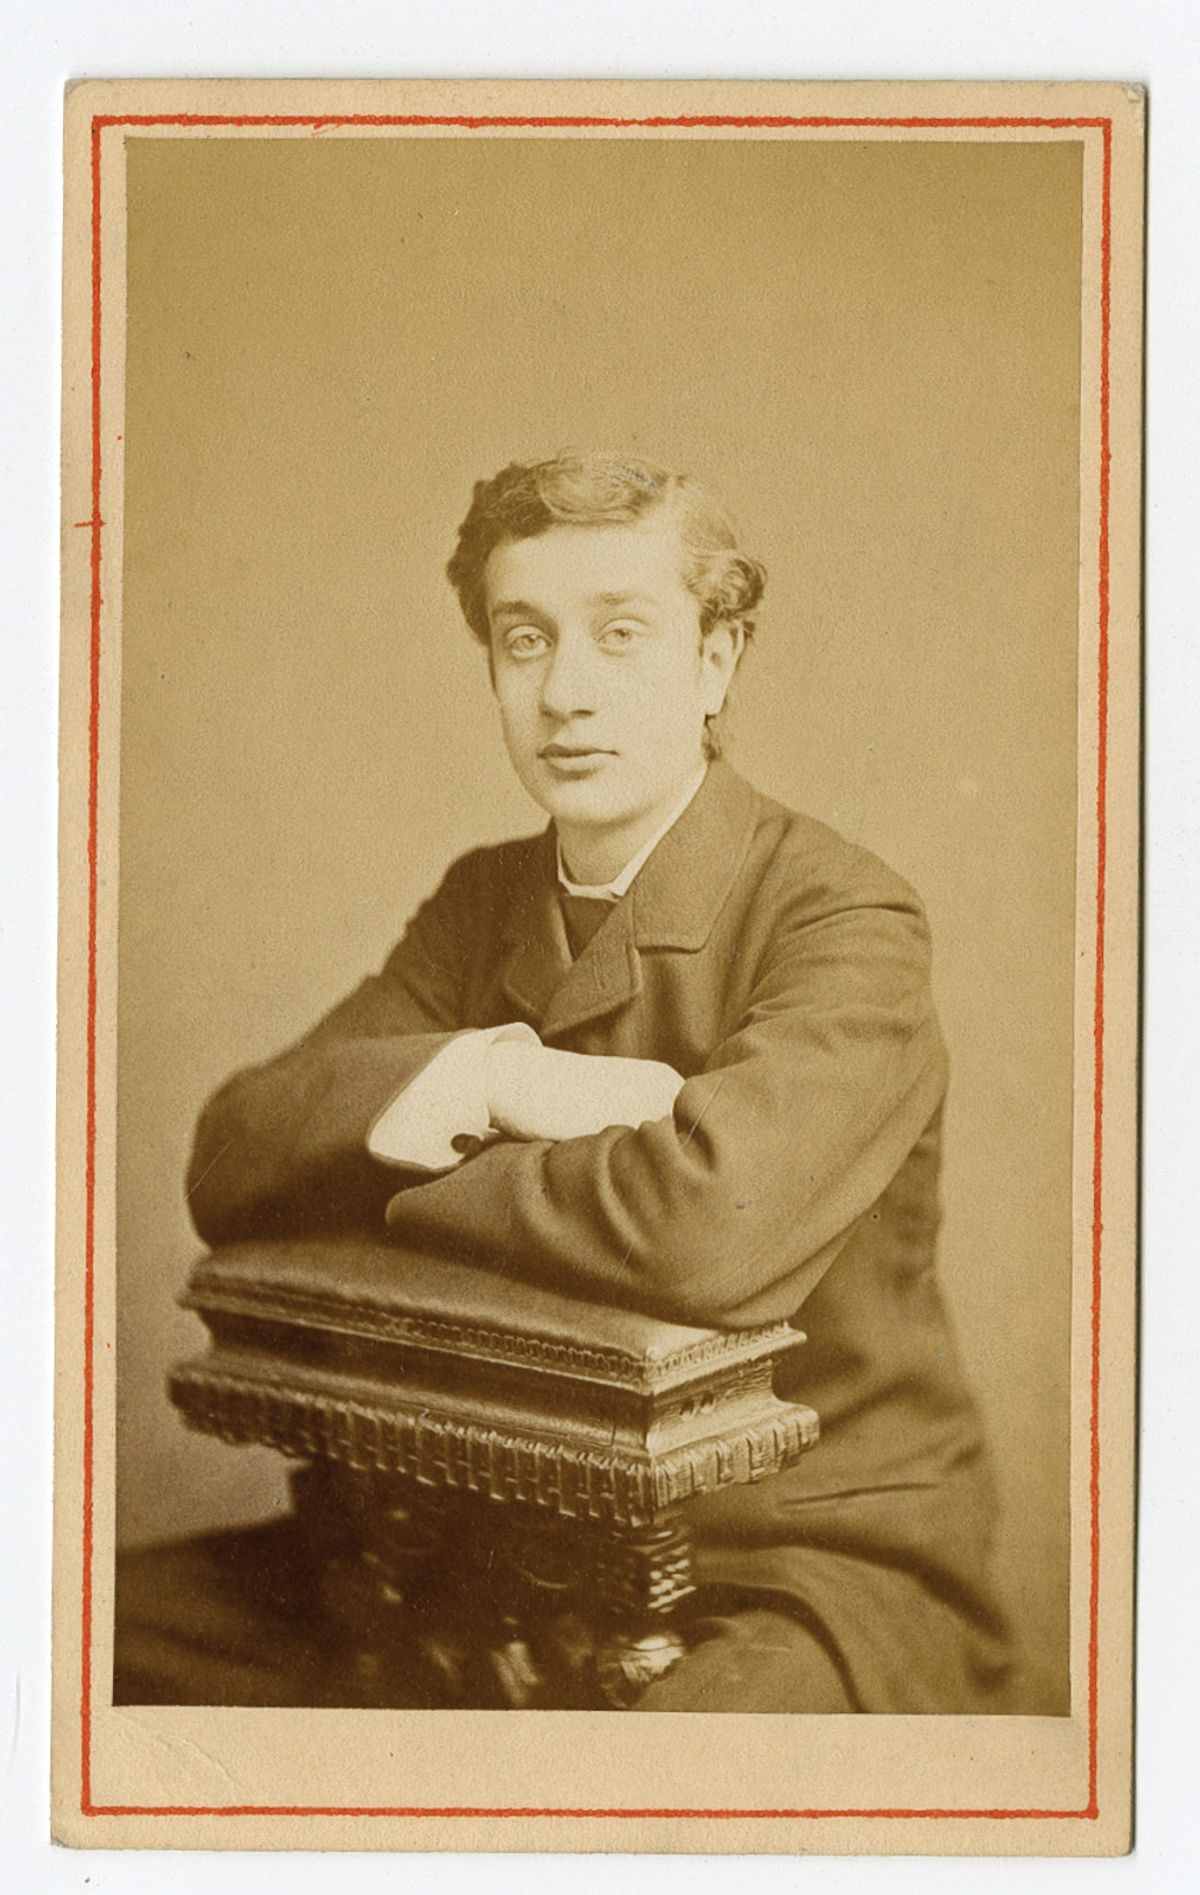 Emslie Horniman, aged 27, about 1890 © Horniman Museum and Gardens